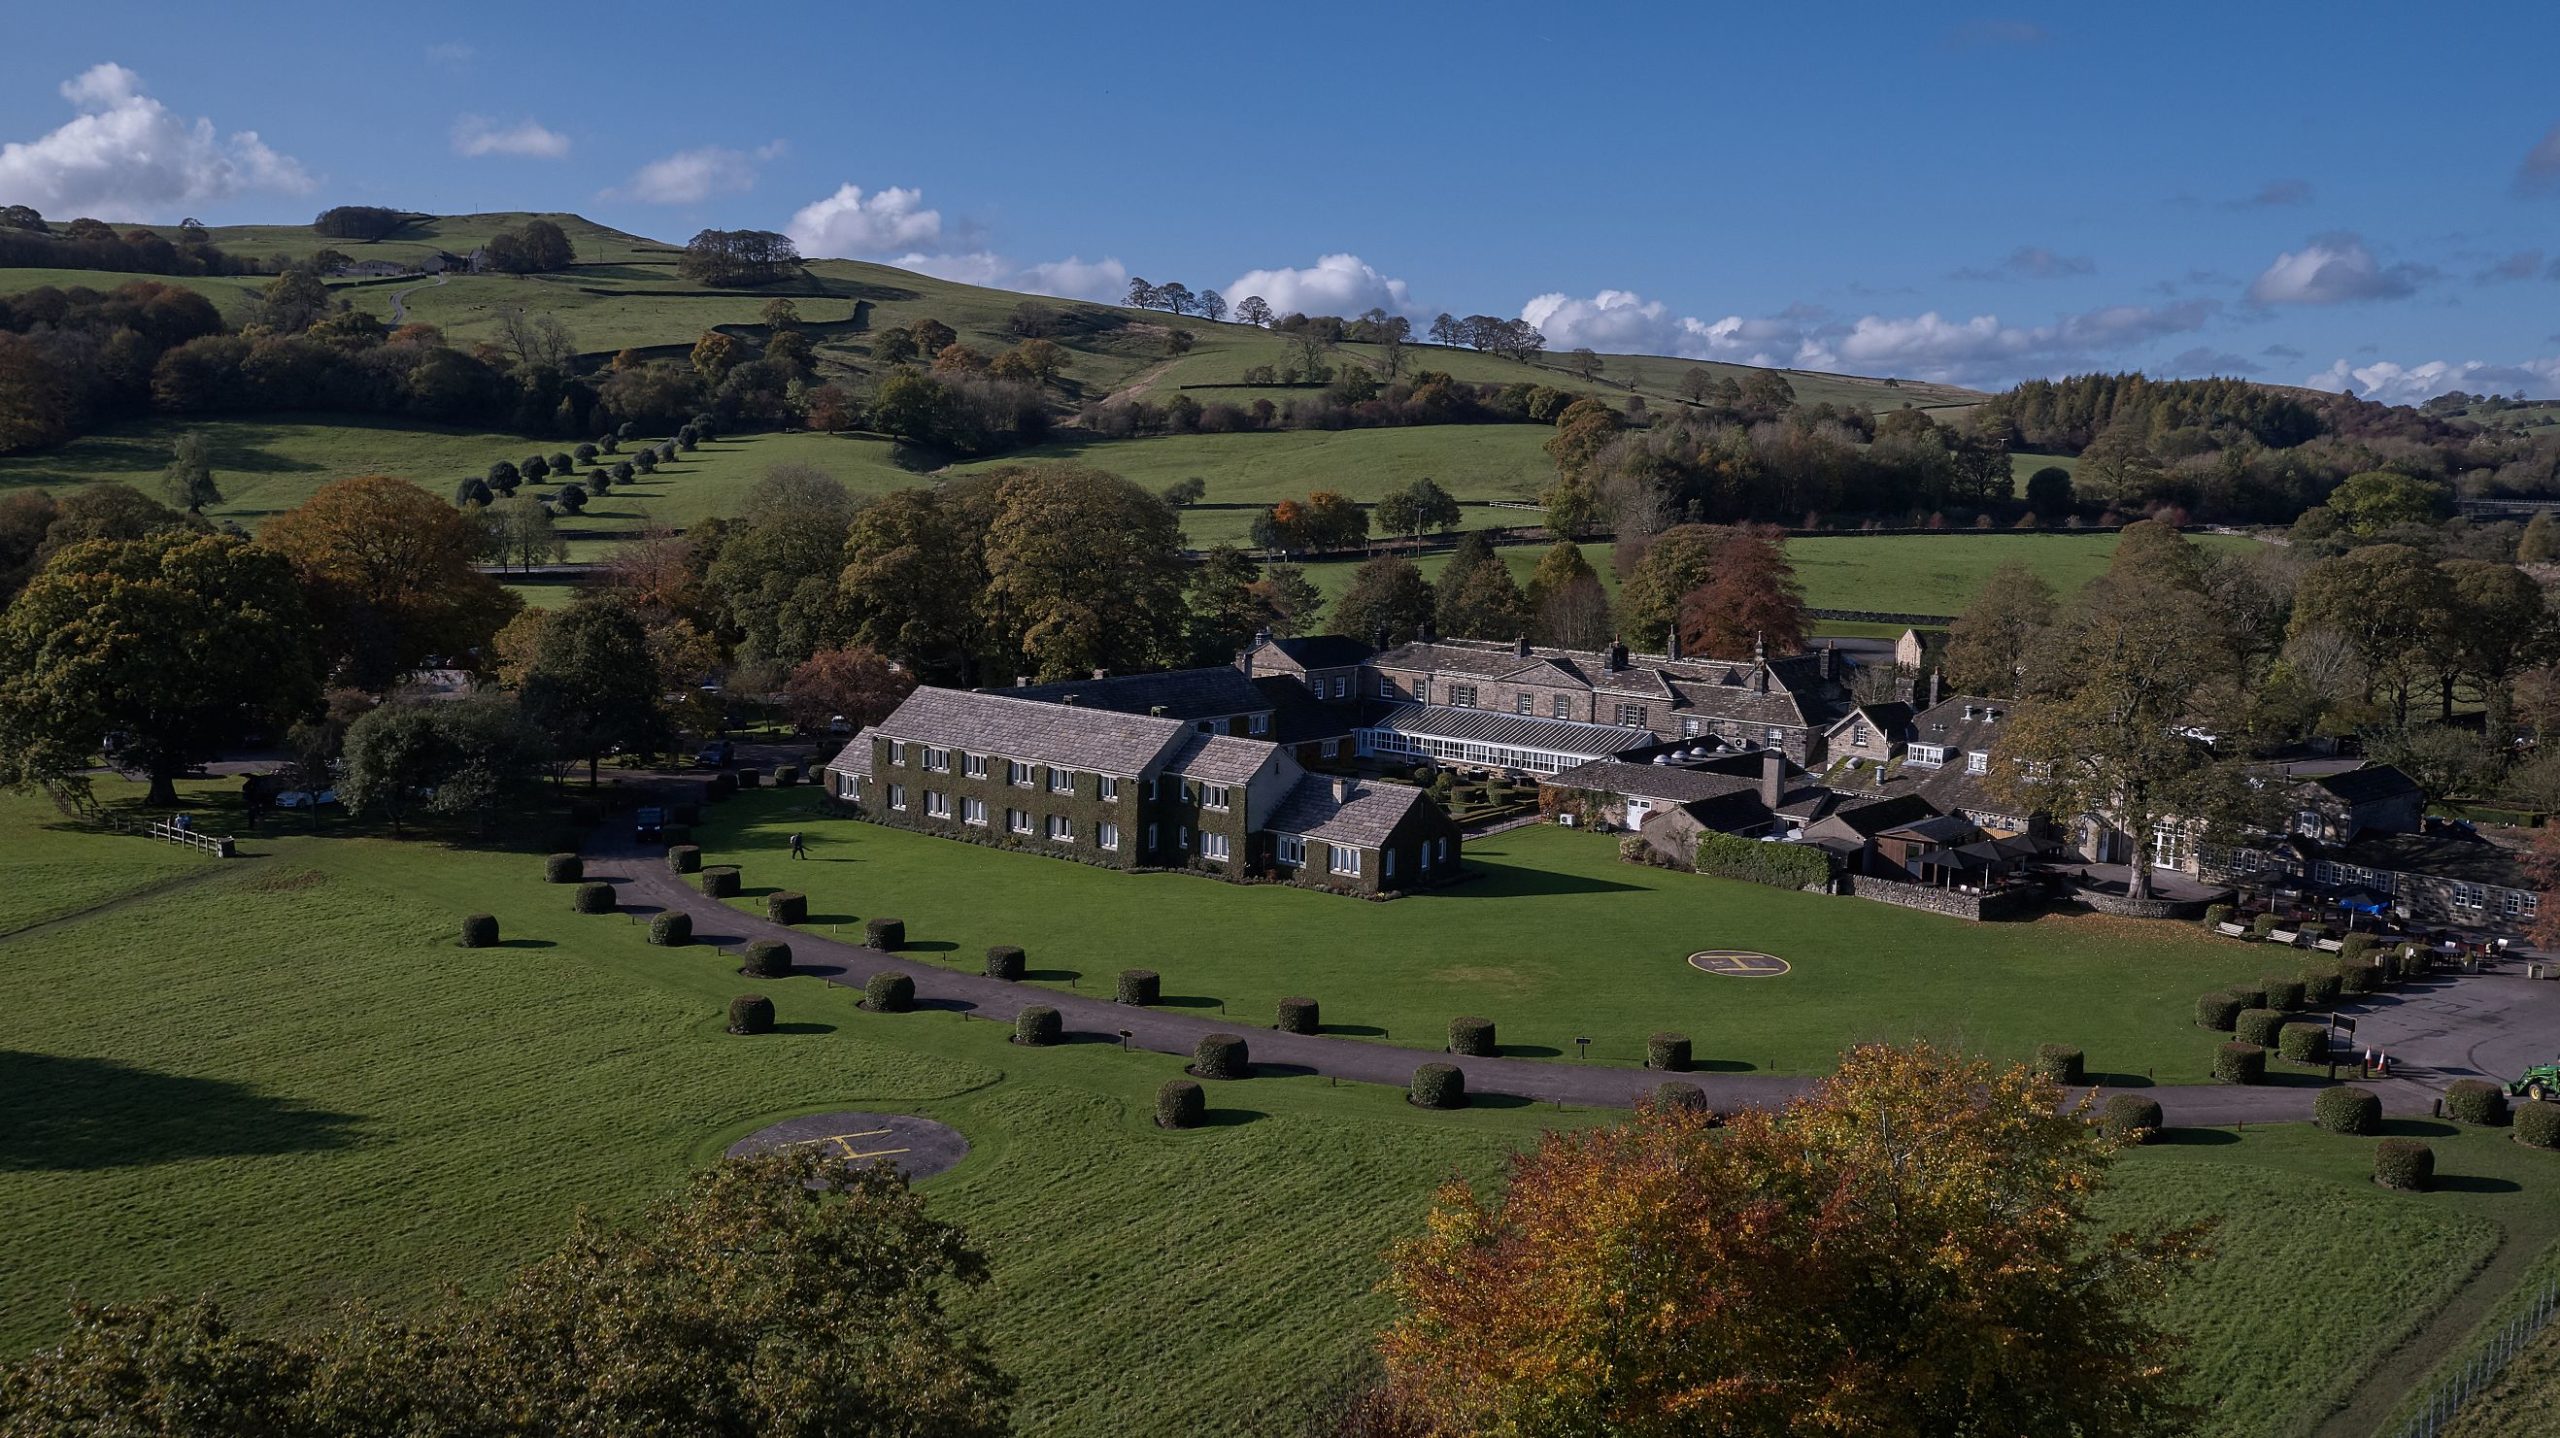 DEVONSHIRE HOTELS PICKS CUNNING PLAN FOR BRAND AND WEBSITE BRIEF